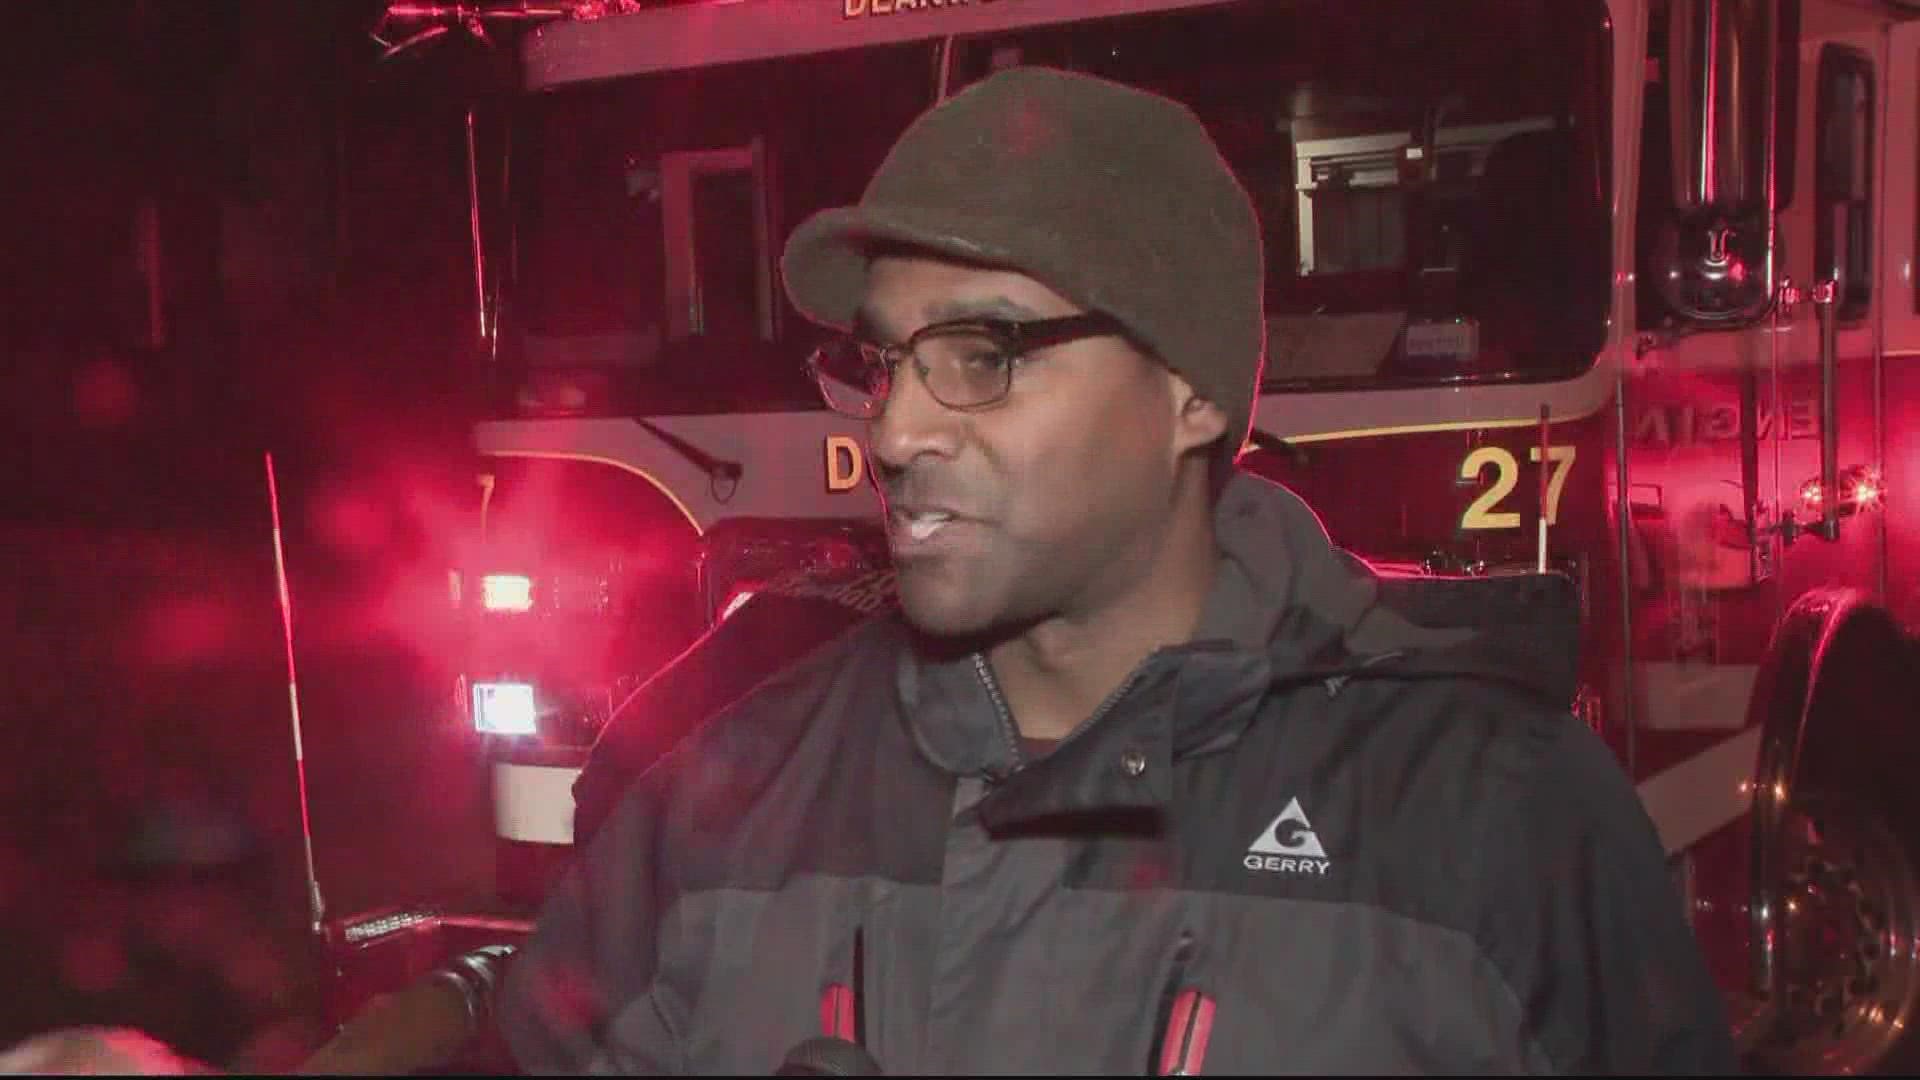 This Northeast DC community say one of their worst fears came to light early this morning - when a person was killed by a fire that tore through a vacant building.